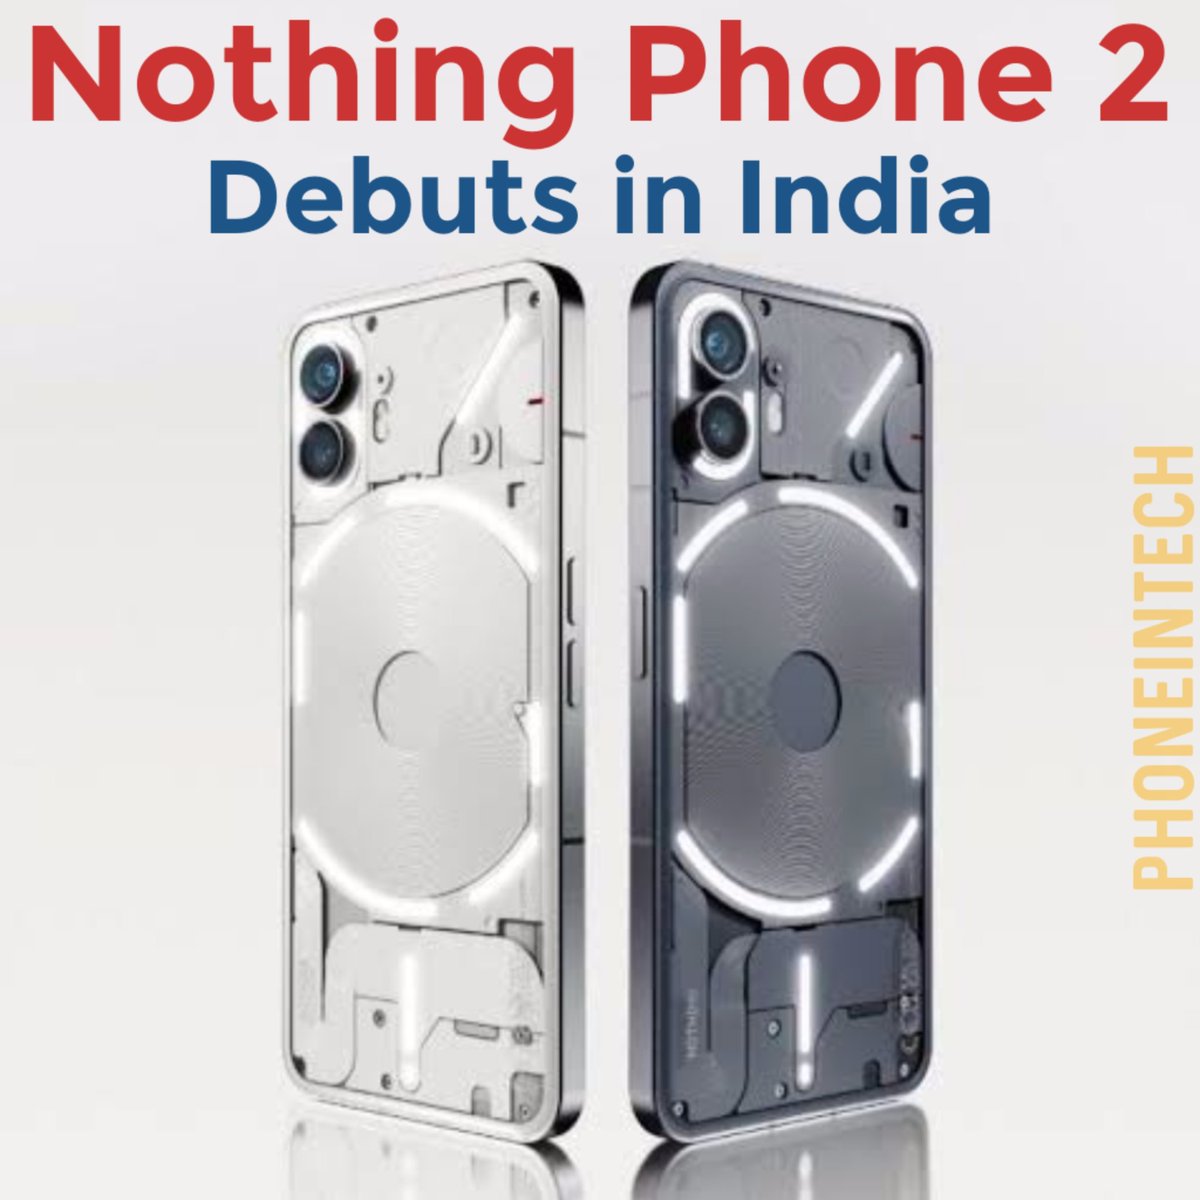 Nothing Phone 2 debuts in India. It is available for pre-orders on Flipkart. It comes with a Snapdragon 8+ Gen 1 SoC and 50mp camera. It has a 4,700mAh battery with 45W charging support.

#nothingphone2 #nothingphone #nothingsmartphone #latestsmartphones #technewsindia